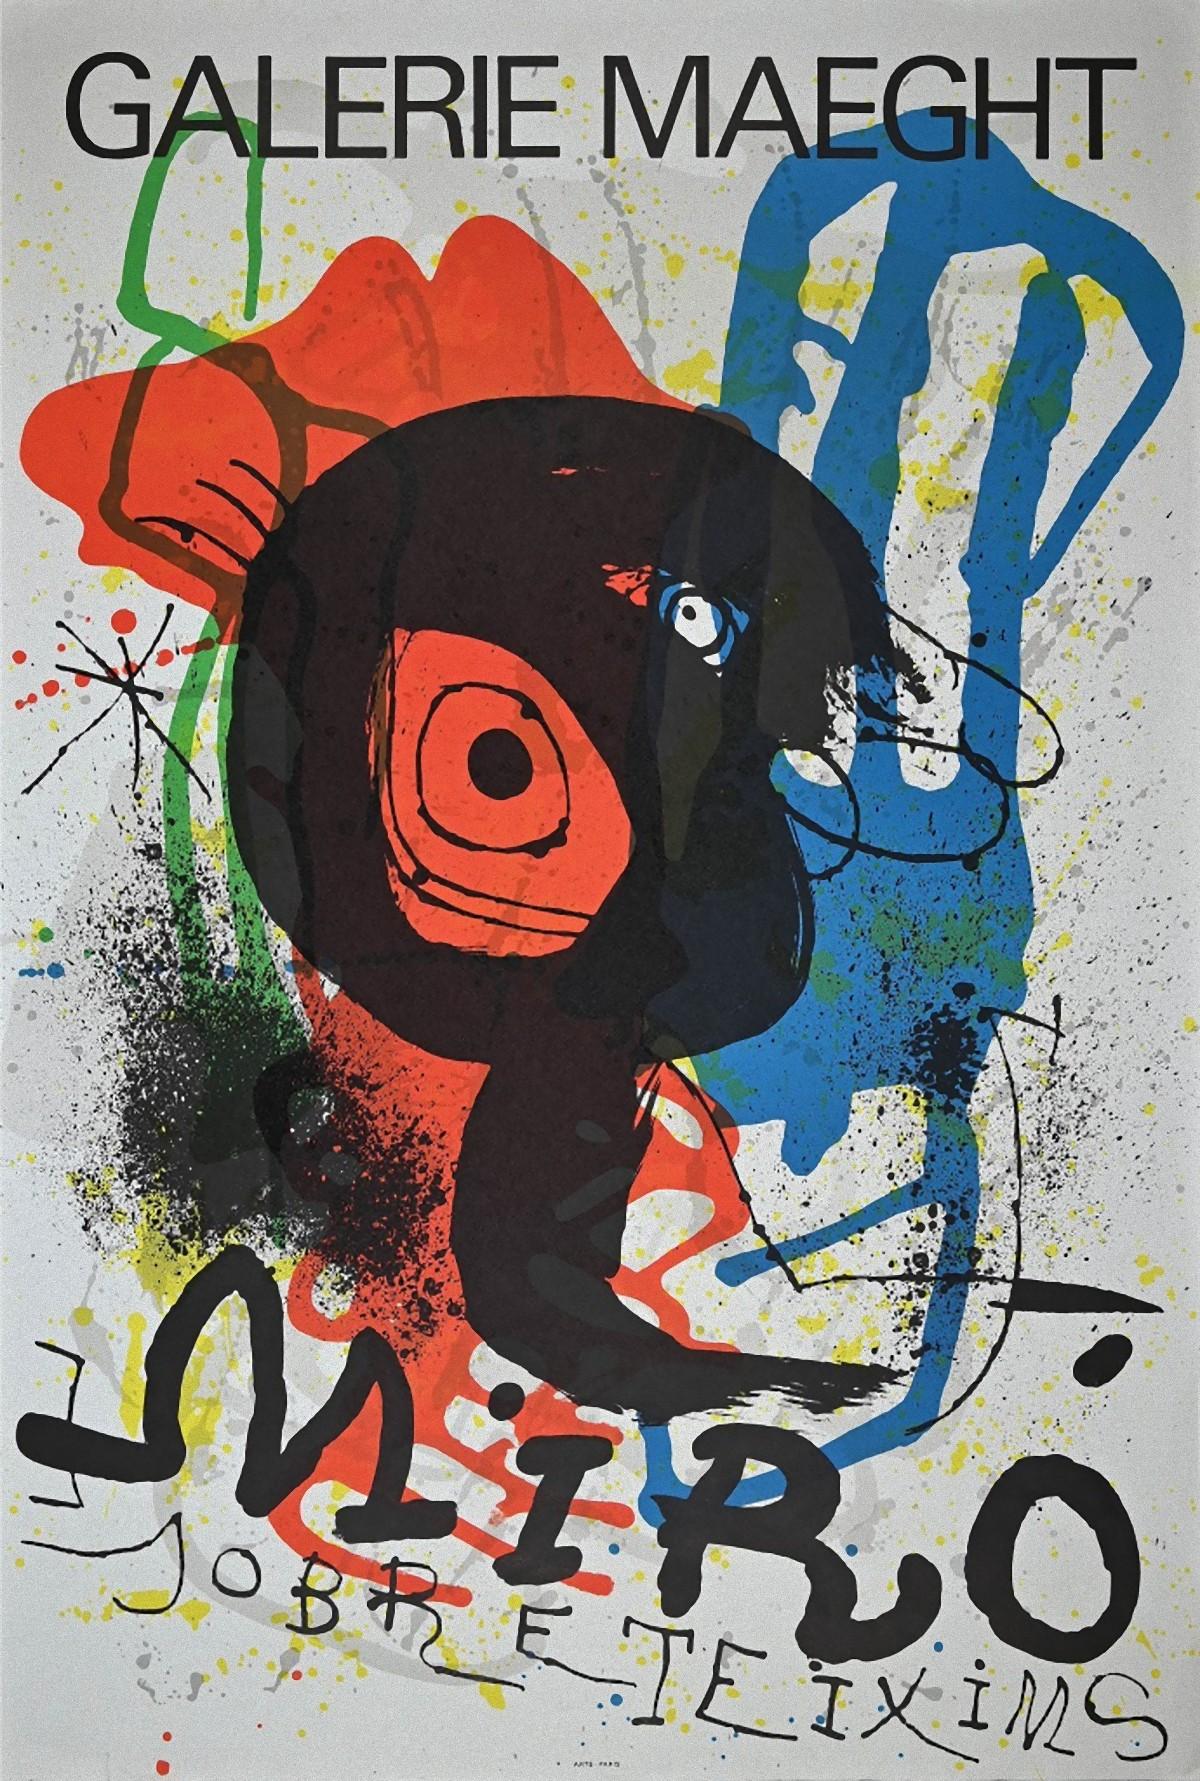 Sobreteixims -Vintage Lithographic Poster After Joan Miró - 1973